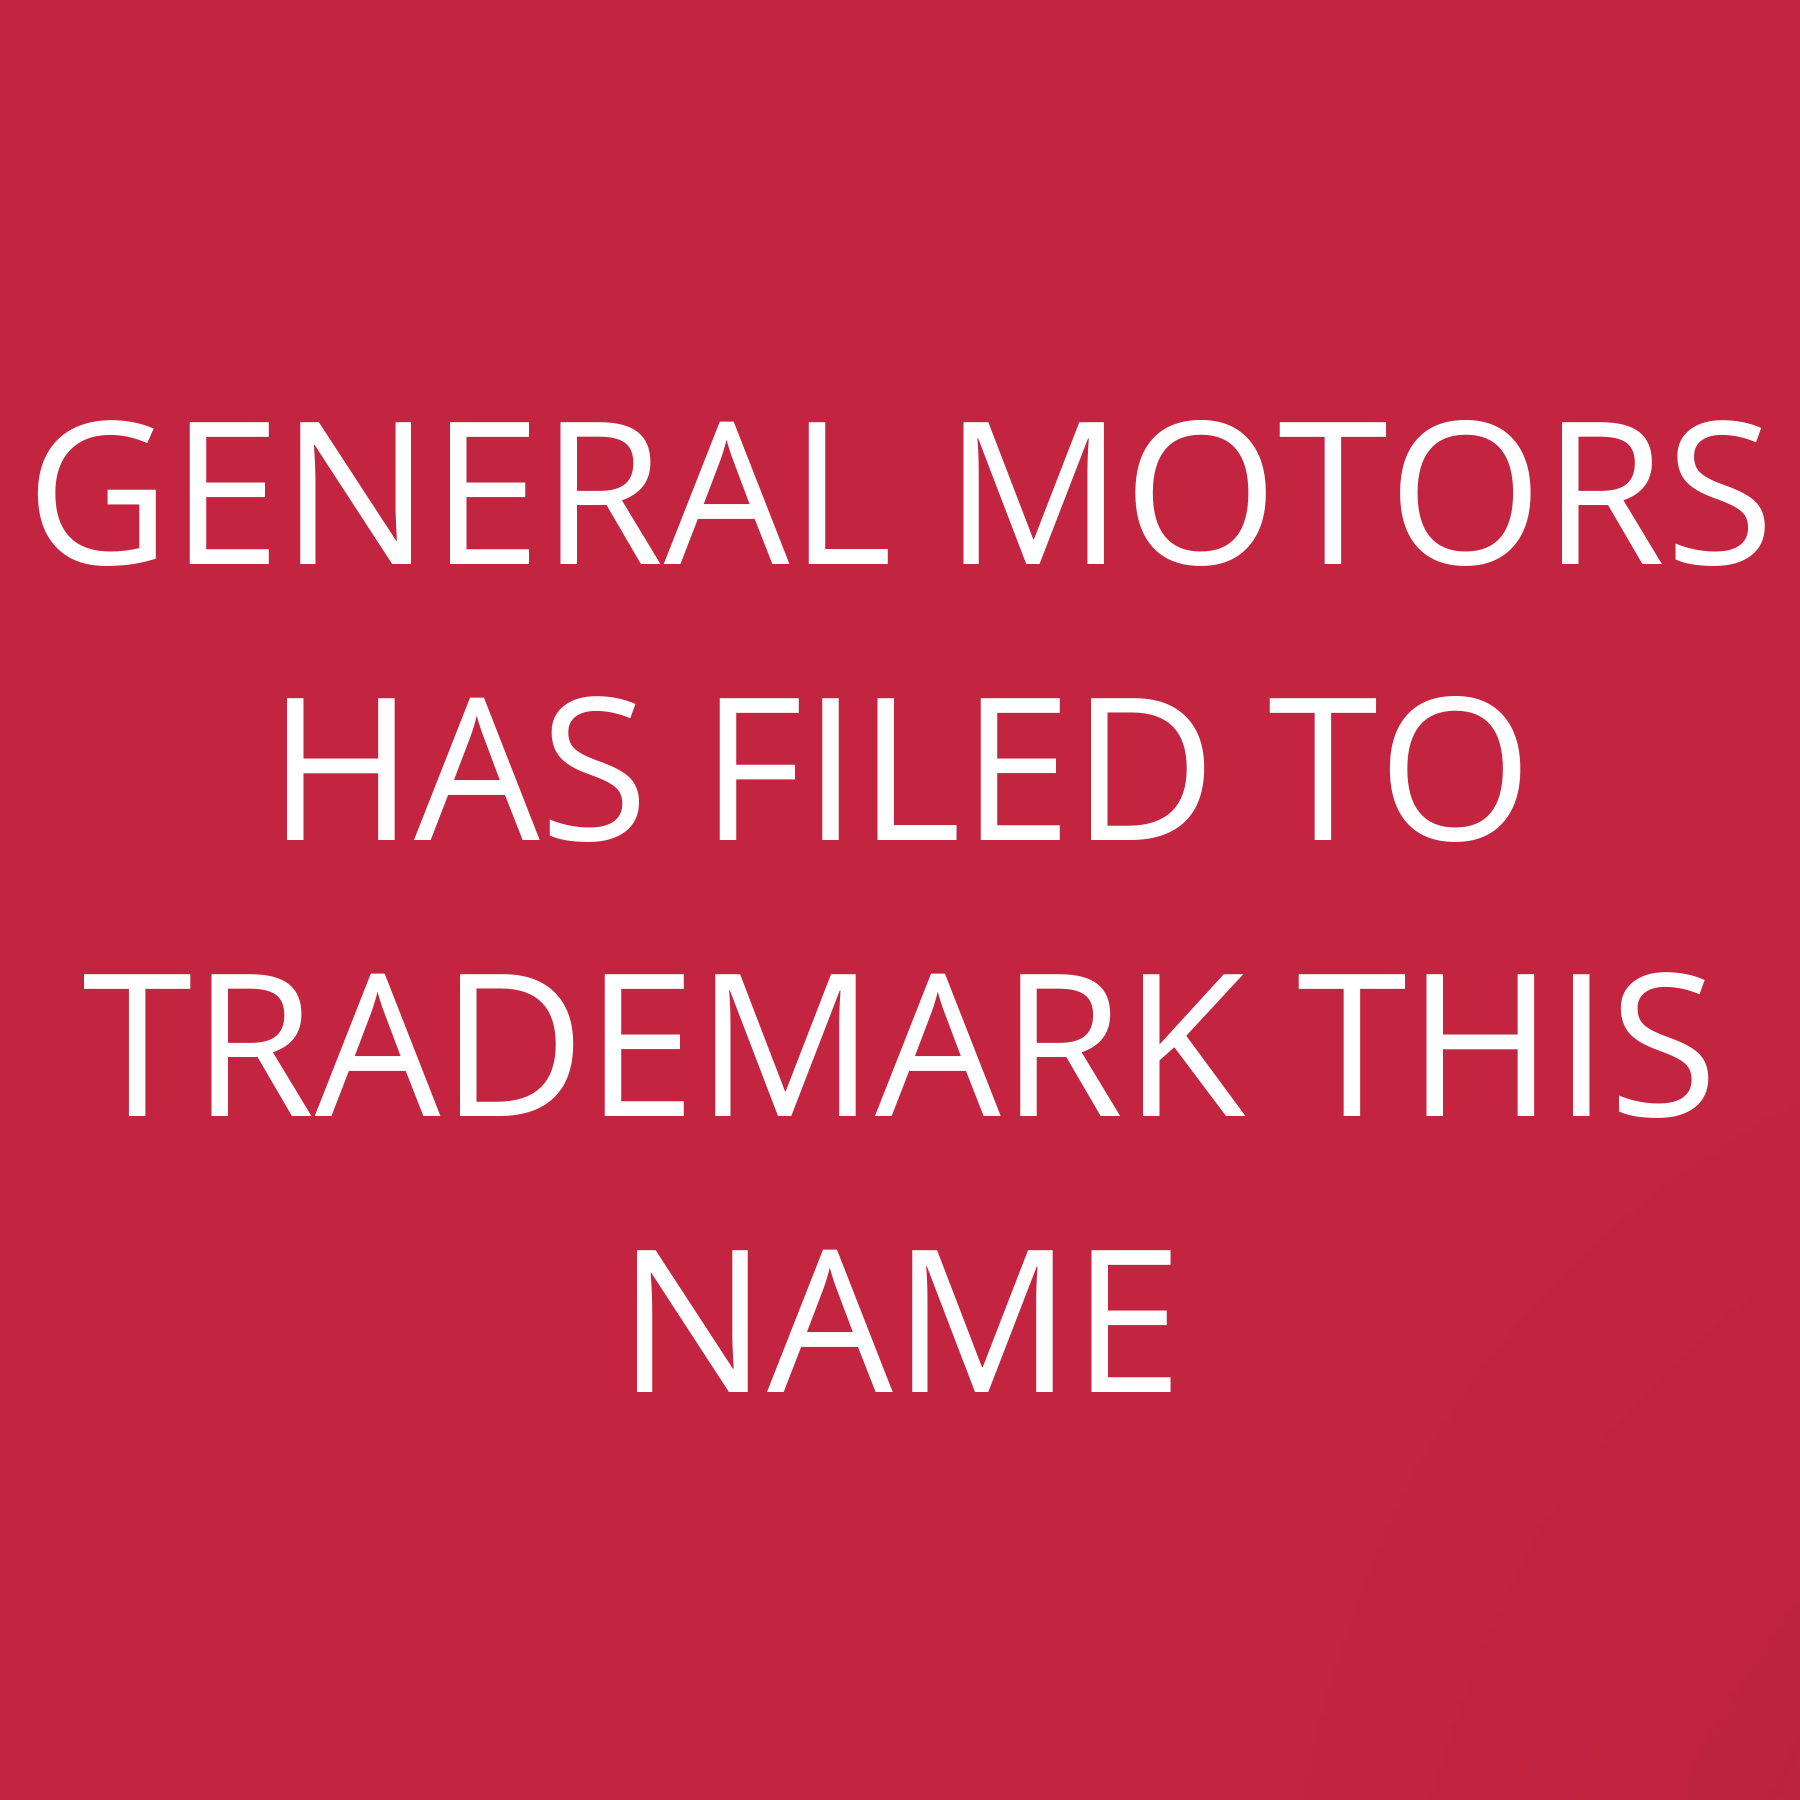 General Motors has filed to trademark this name